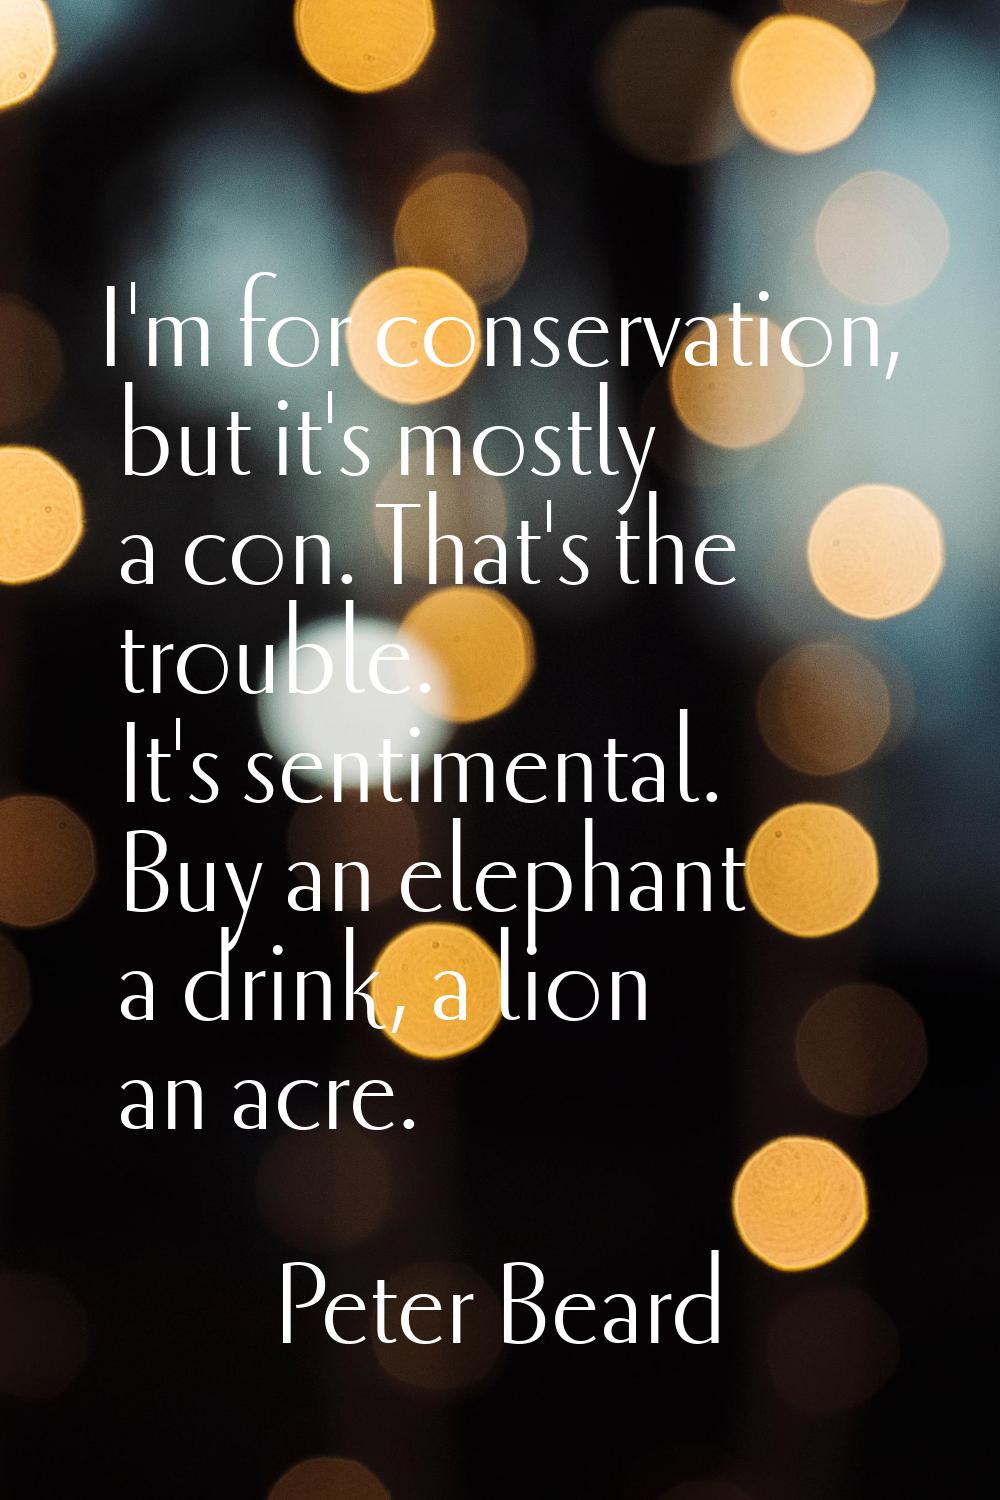 I'm for conservation, but it's mostly a con. That's the trouble. It's sentimental. Buy an elephant 